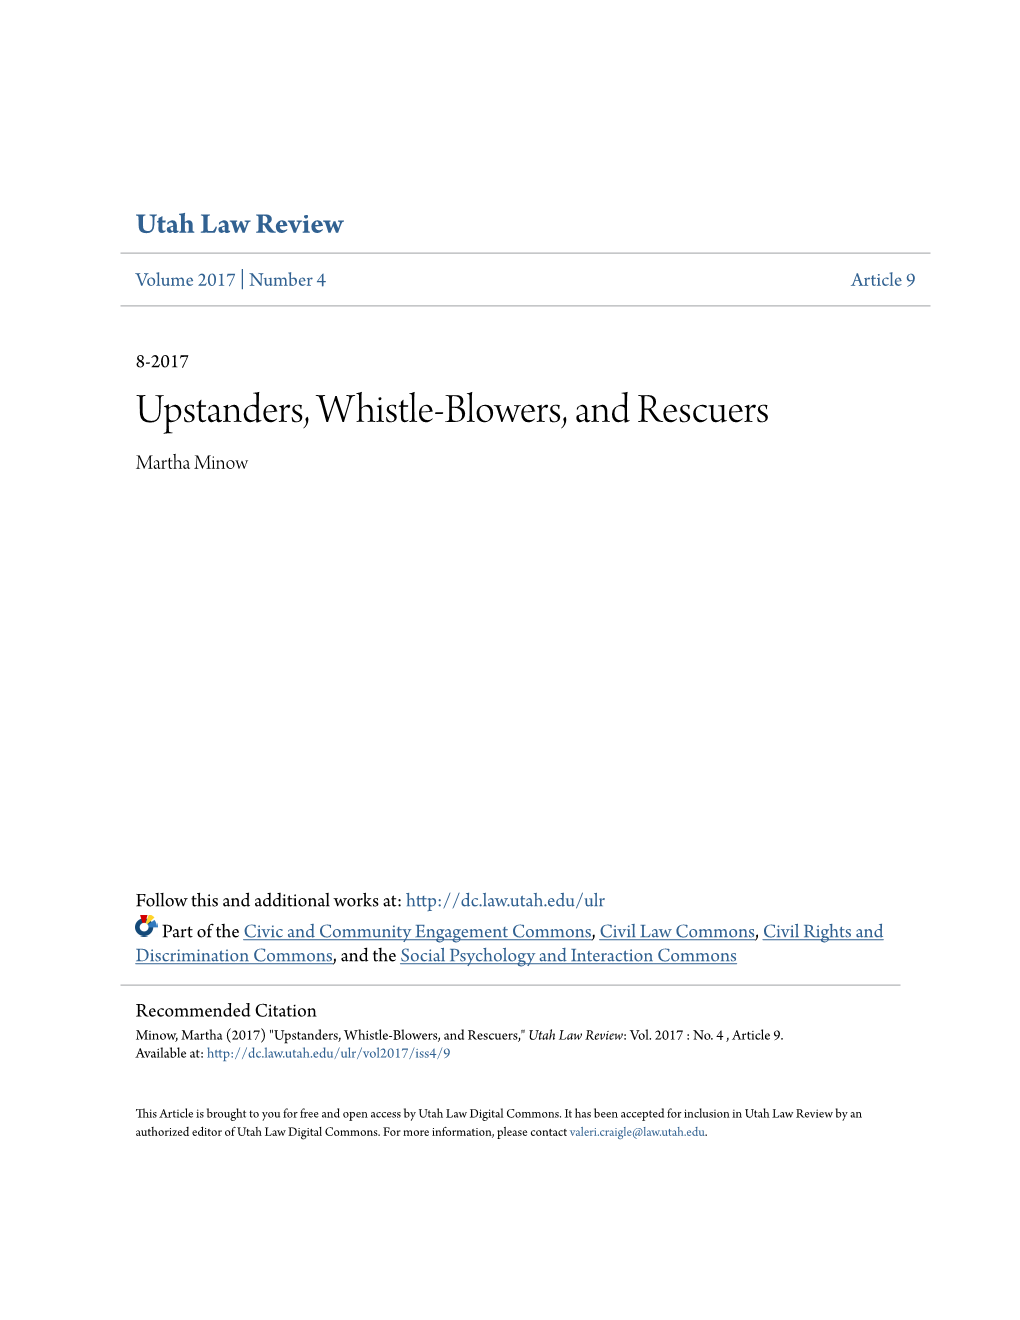 Upstanders, Whistle-Blowers, and Rescuers Martha Minow